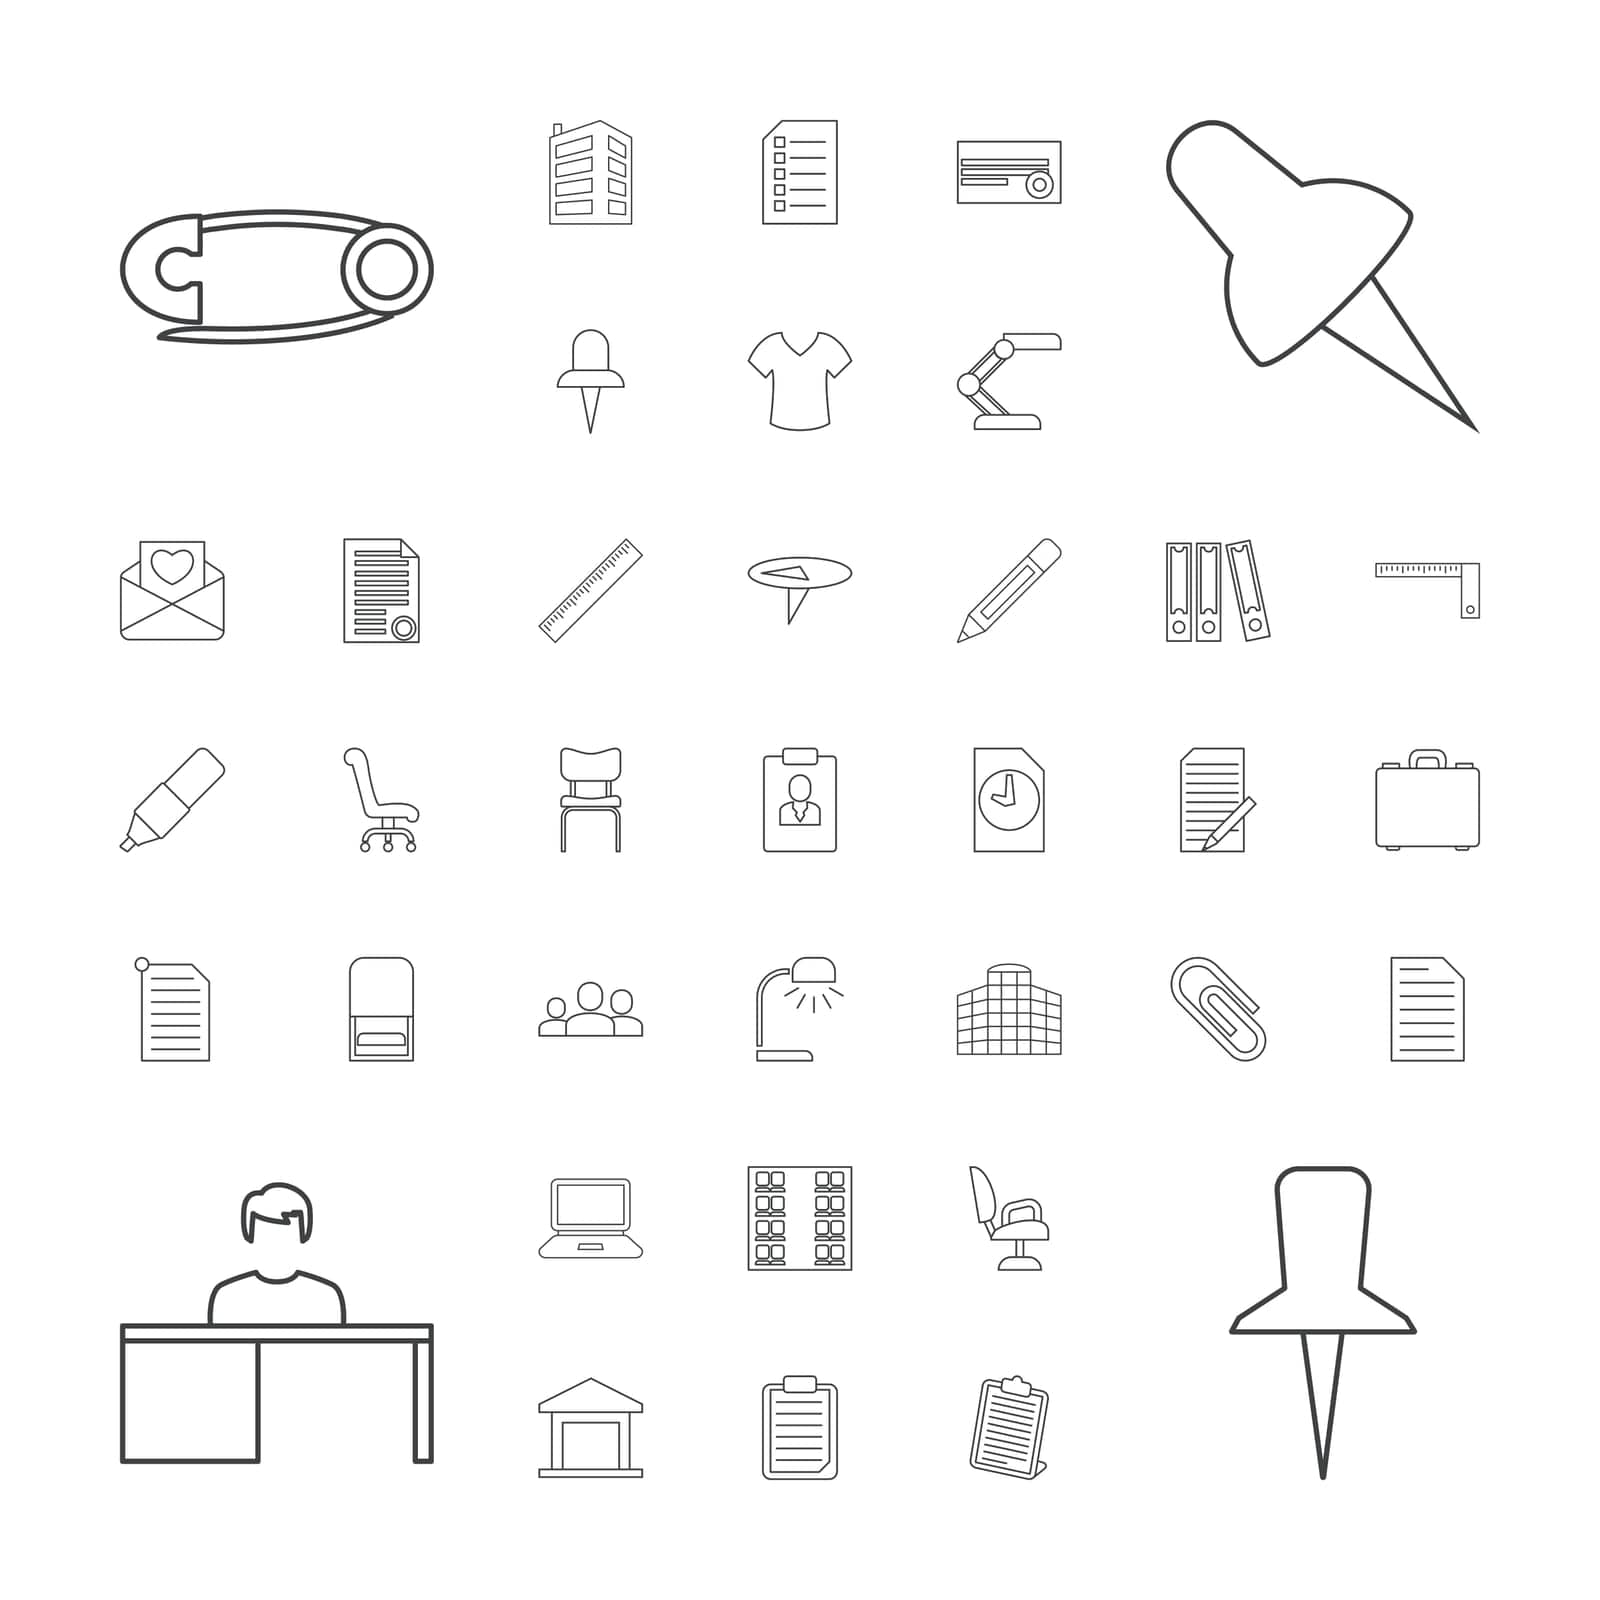 love,plane,symbol,document,icon,sign,isolated,office,ruler,laptop,supply,clipboard,seats,building,pin,paper,design,pen,working,vector,man,barber,binder,table,case,group,set,chair,lamp,pencil,the,shirt,at,background,letter,illustration,clip by ogqcorp